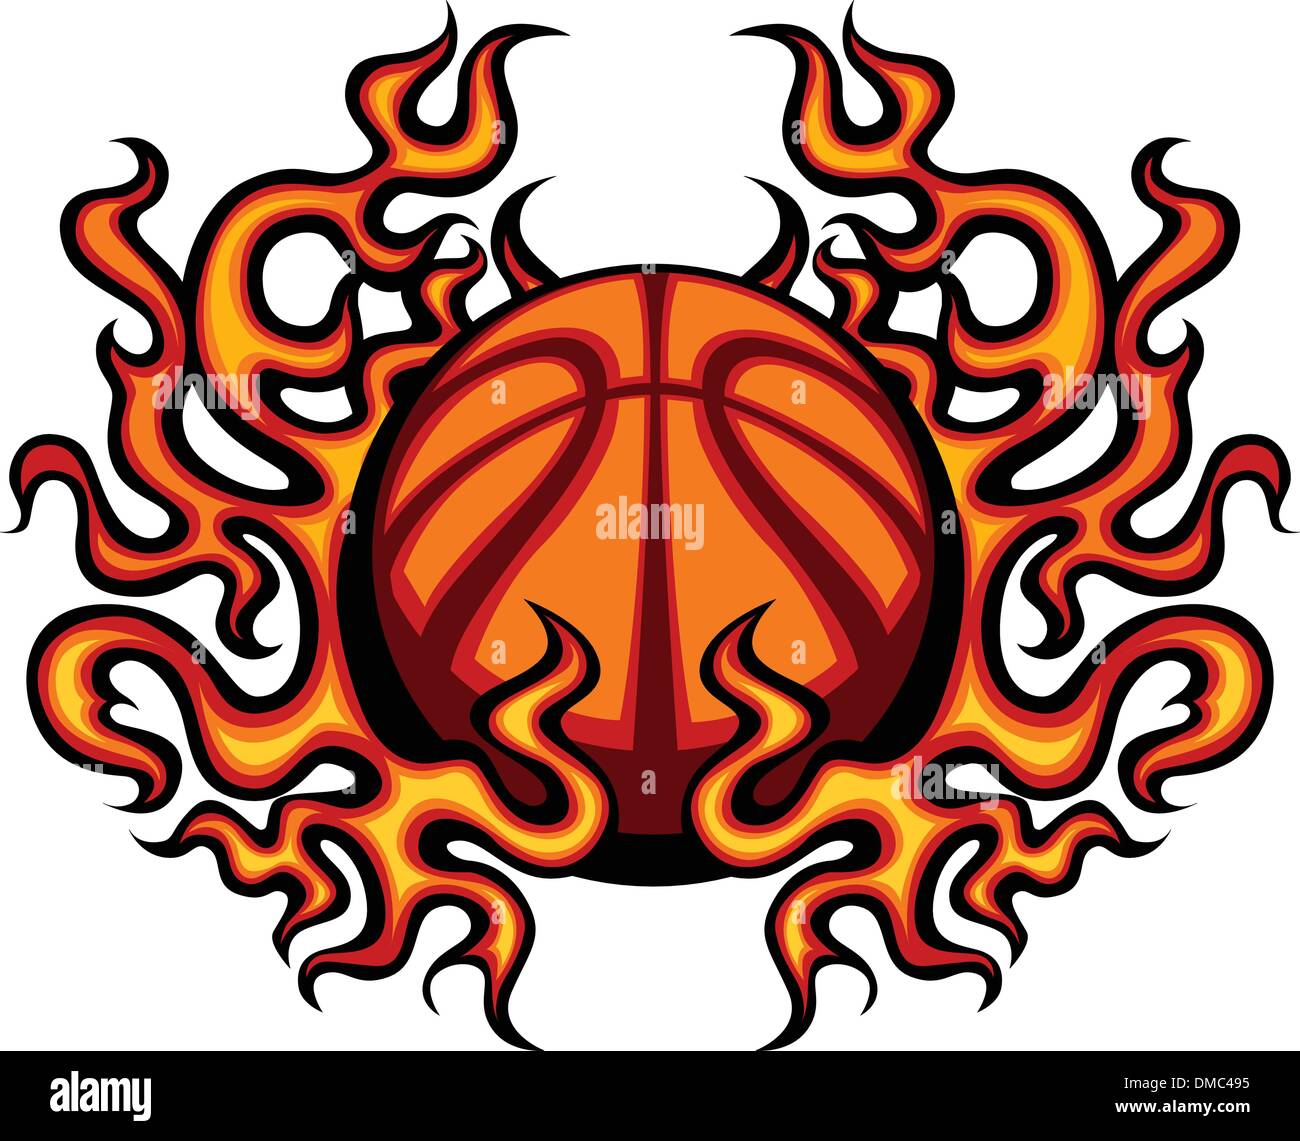 Basketball Template with Flames Vector Image Stock Vector